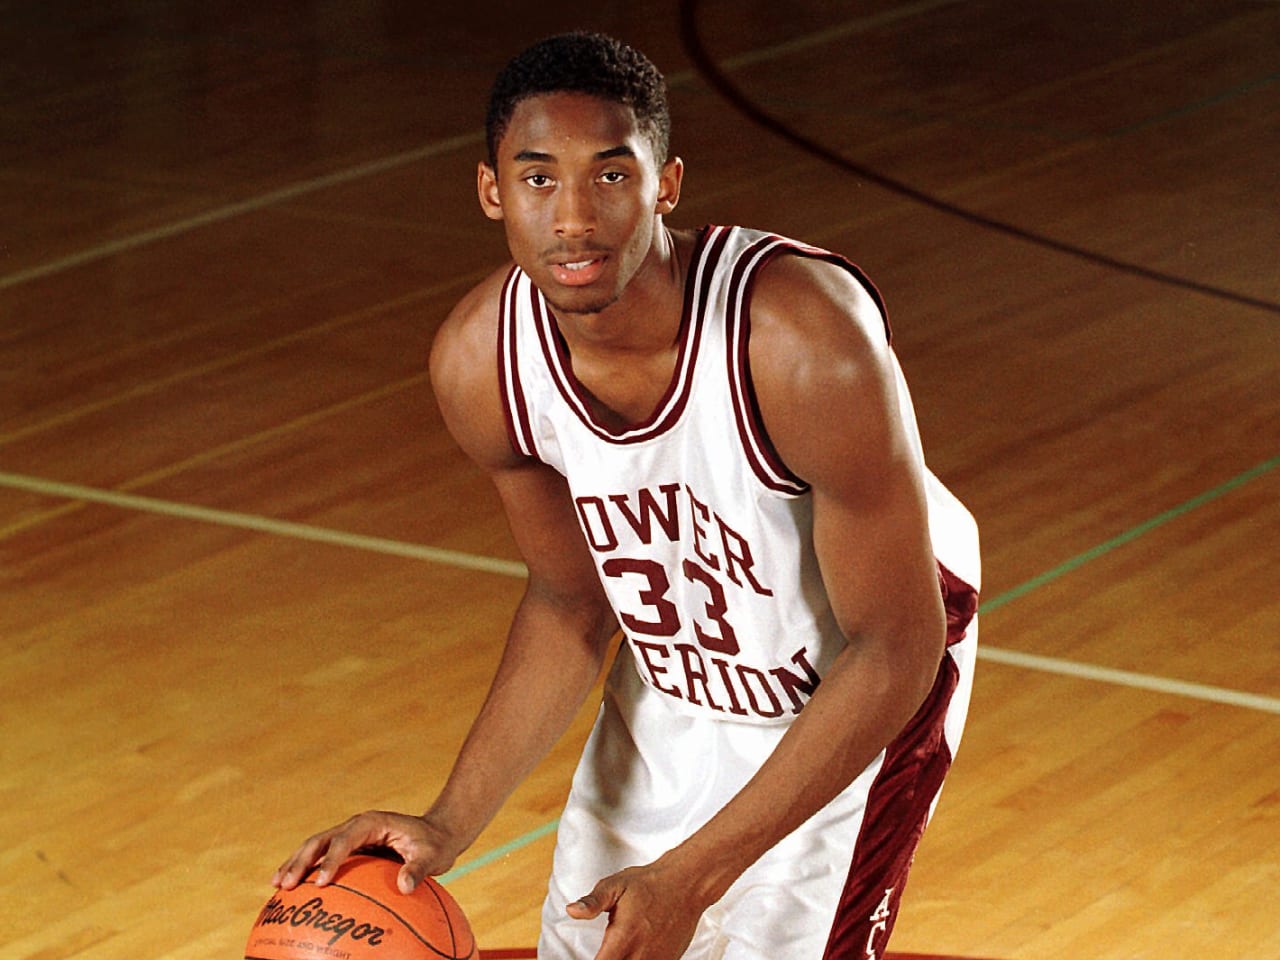 Kobe Bryant images that you've never seen from his high school days